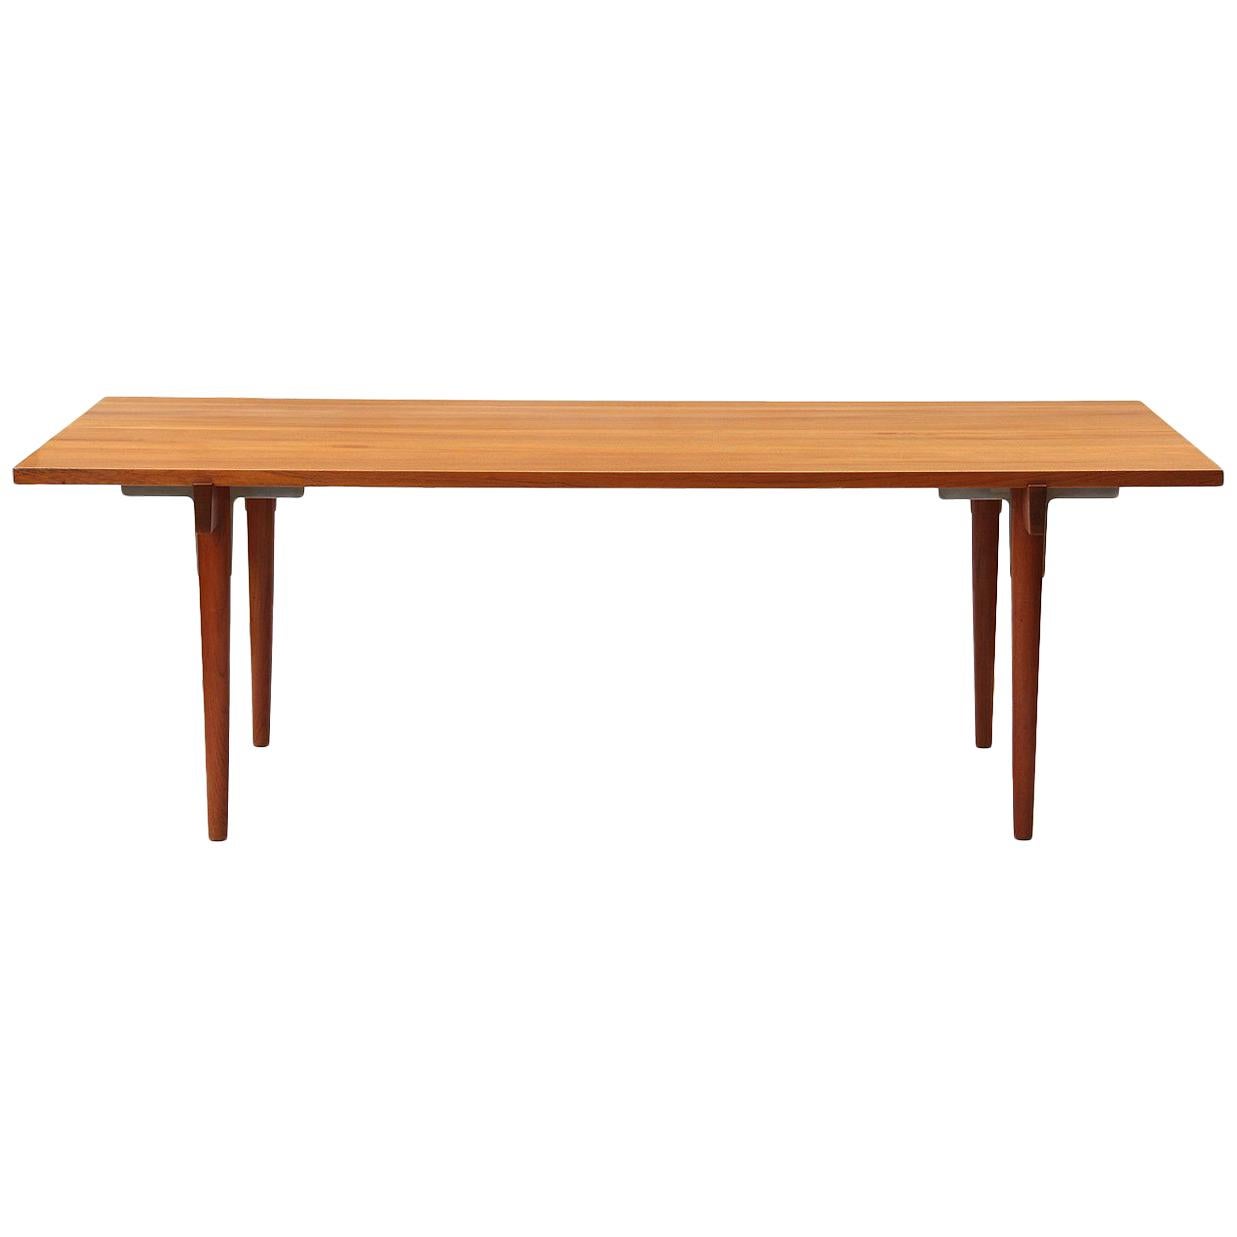 A rare Danish modern solid teak table / desk with clean sides and a recessed apron with chromium hardware. Designed by Hans Wegner, crafted by Johannes Hansen in the 1960s.